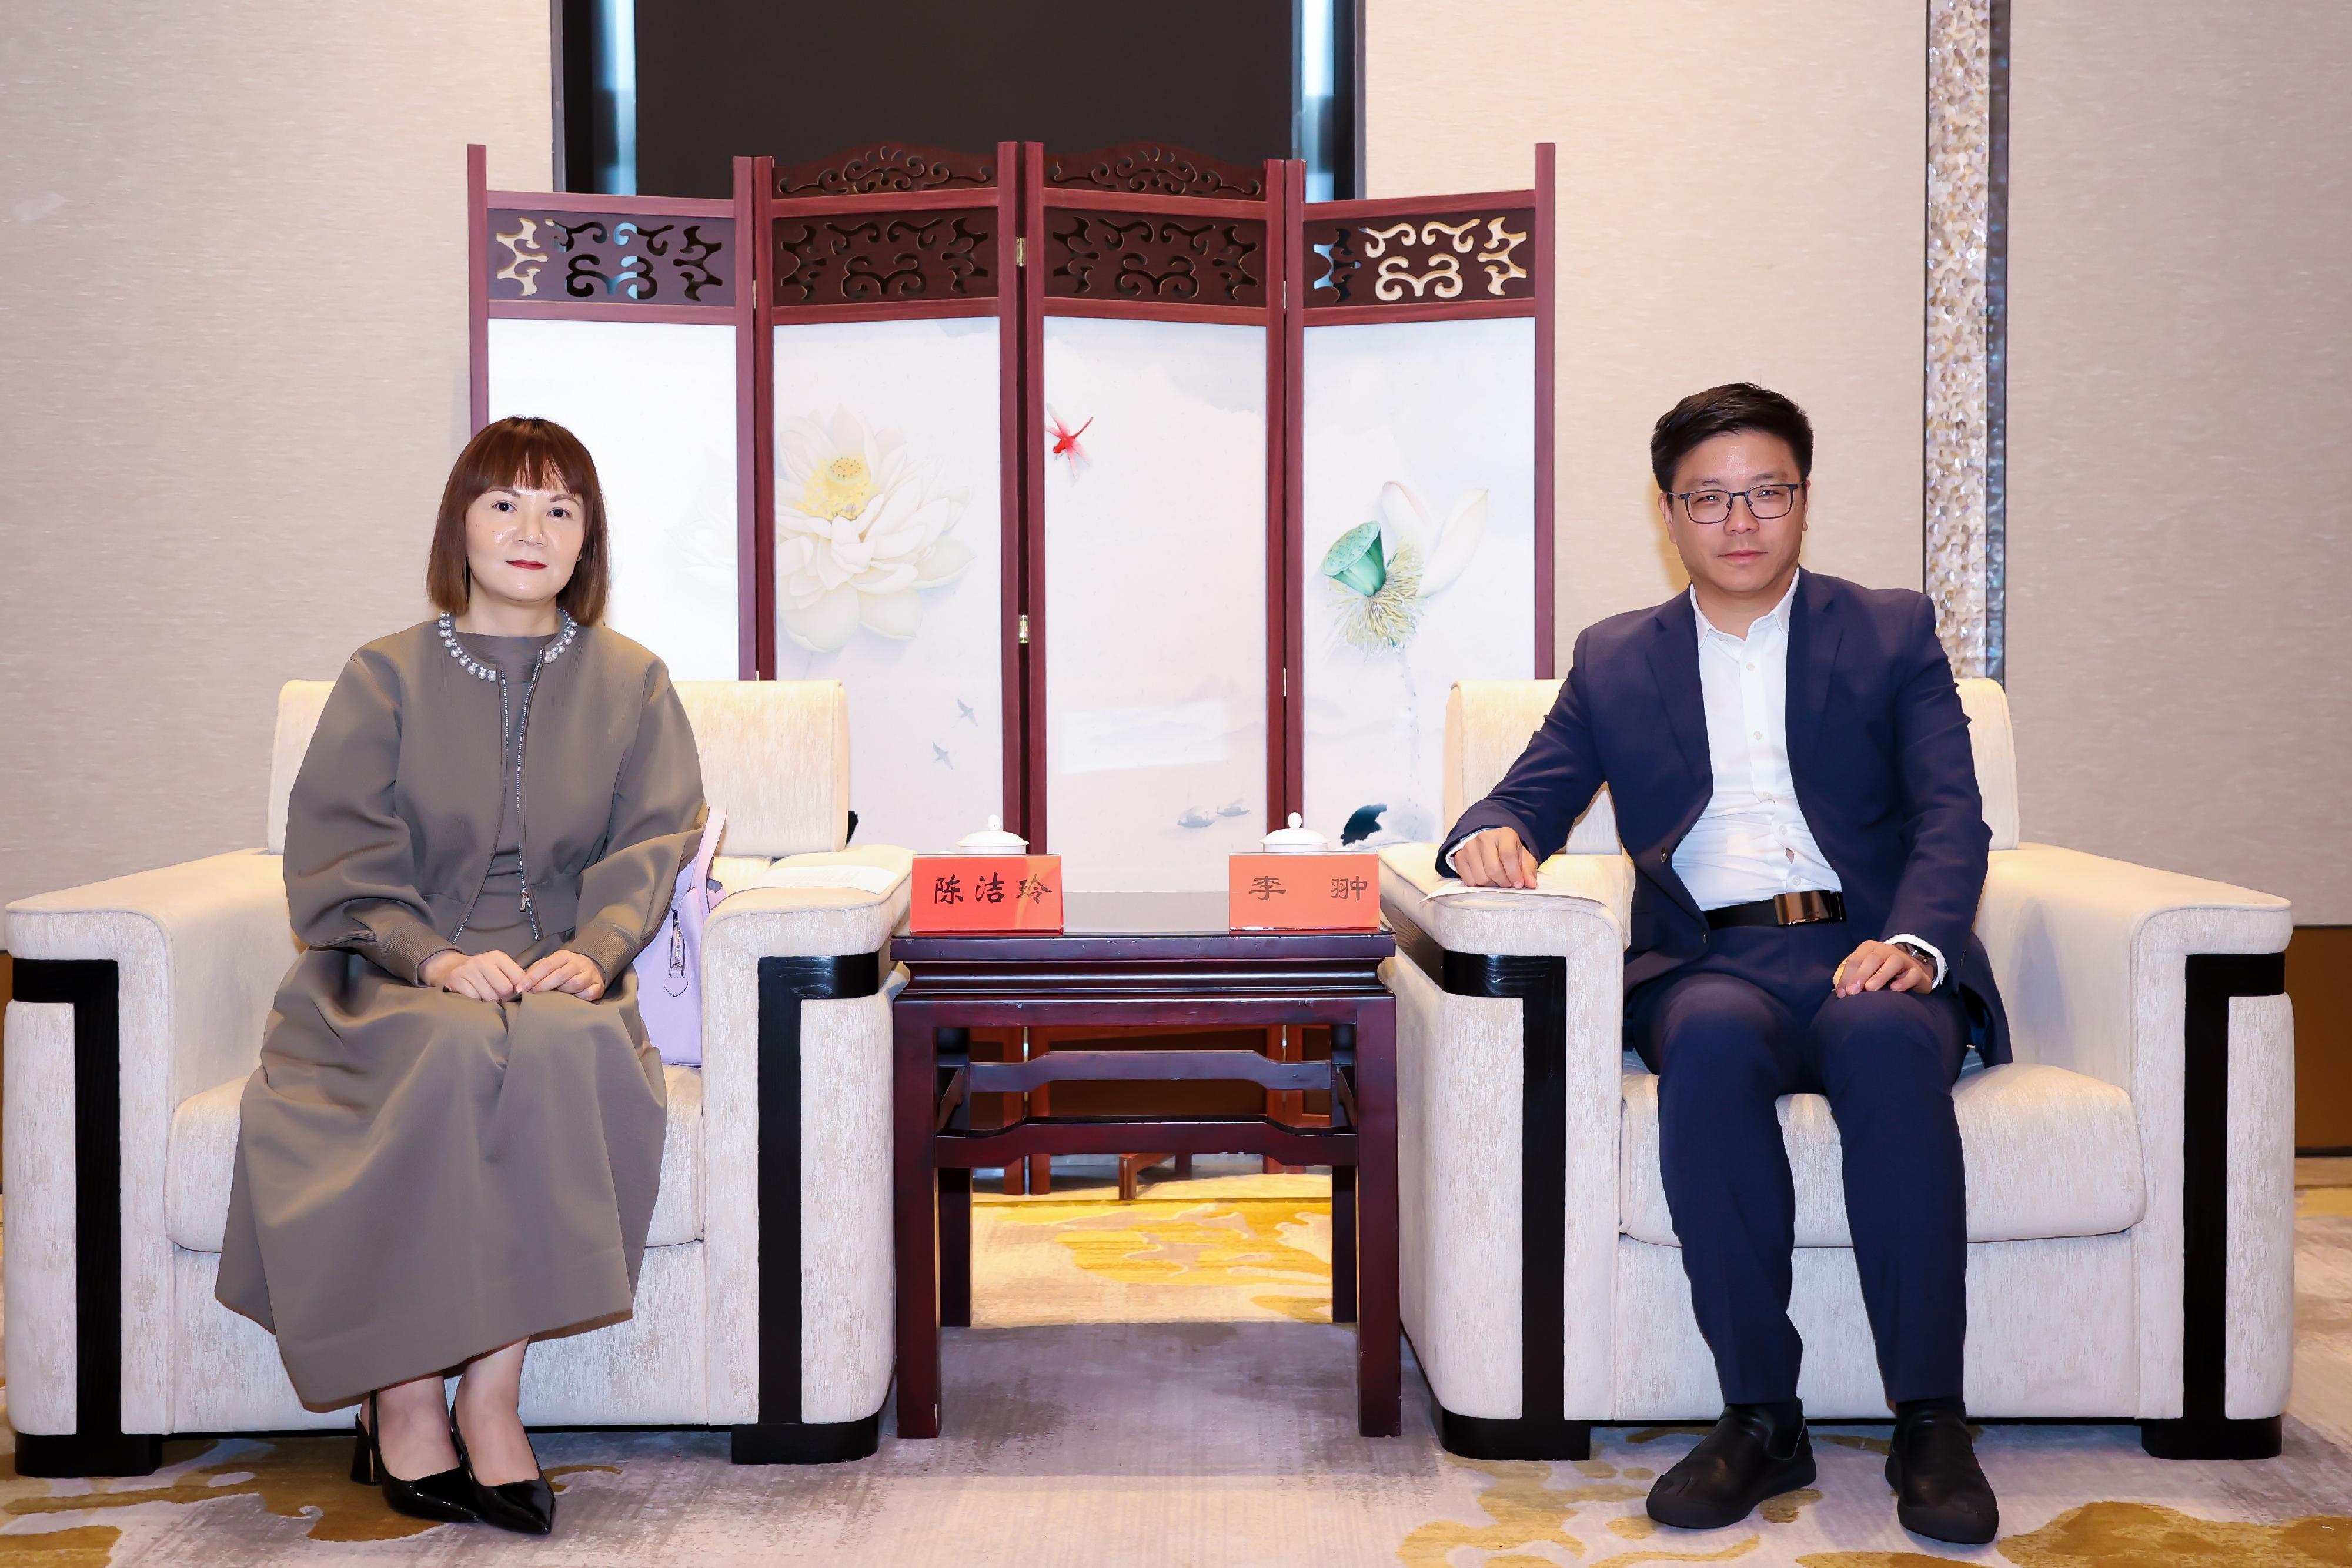 The Commissioner for the Development of the Guangdong-Hong Kong-Macao Greater Bay Area, Ms Maisie Chan (left), visits Zhuhai today (November 8) to meet with Deputy Mayor of Zhuhai Mr Li Chong (right).